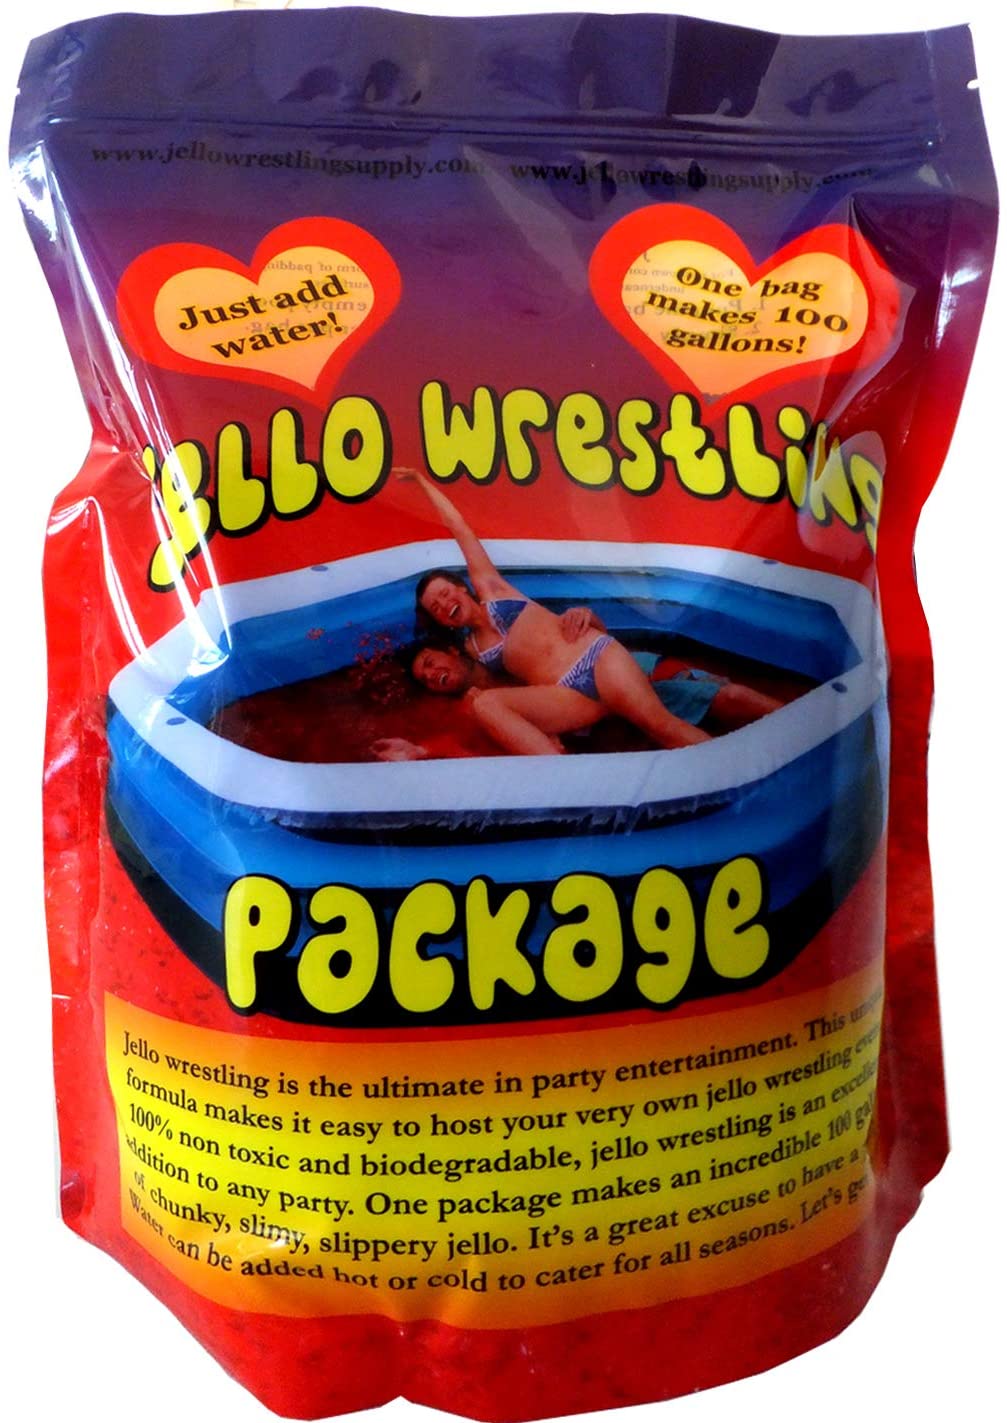 Bulk RED JELLO WRESTLING SUPPLY Jelly Package. Crystal mix makes 100Gal (380L) Just add water!